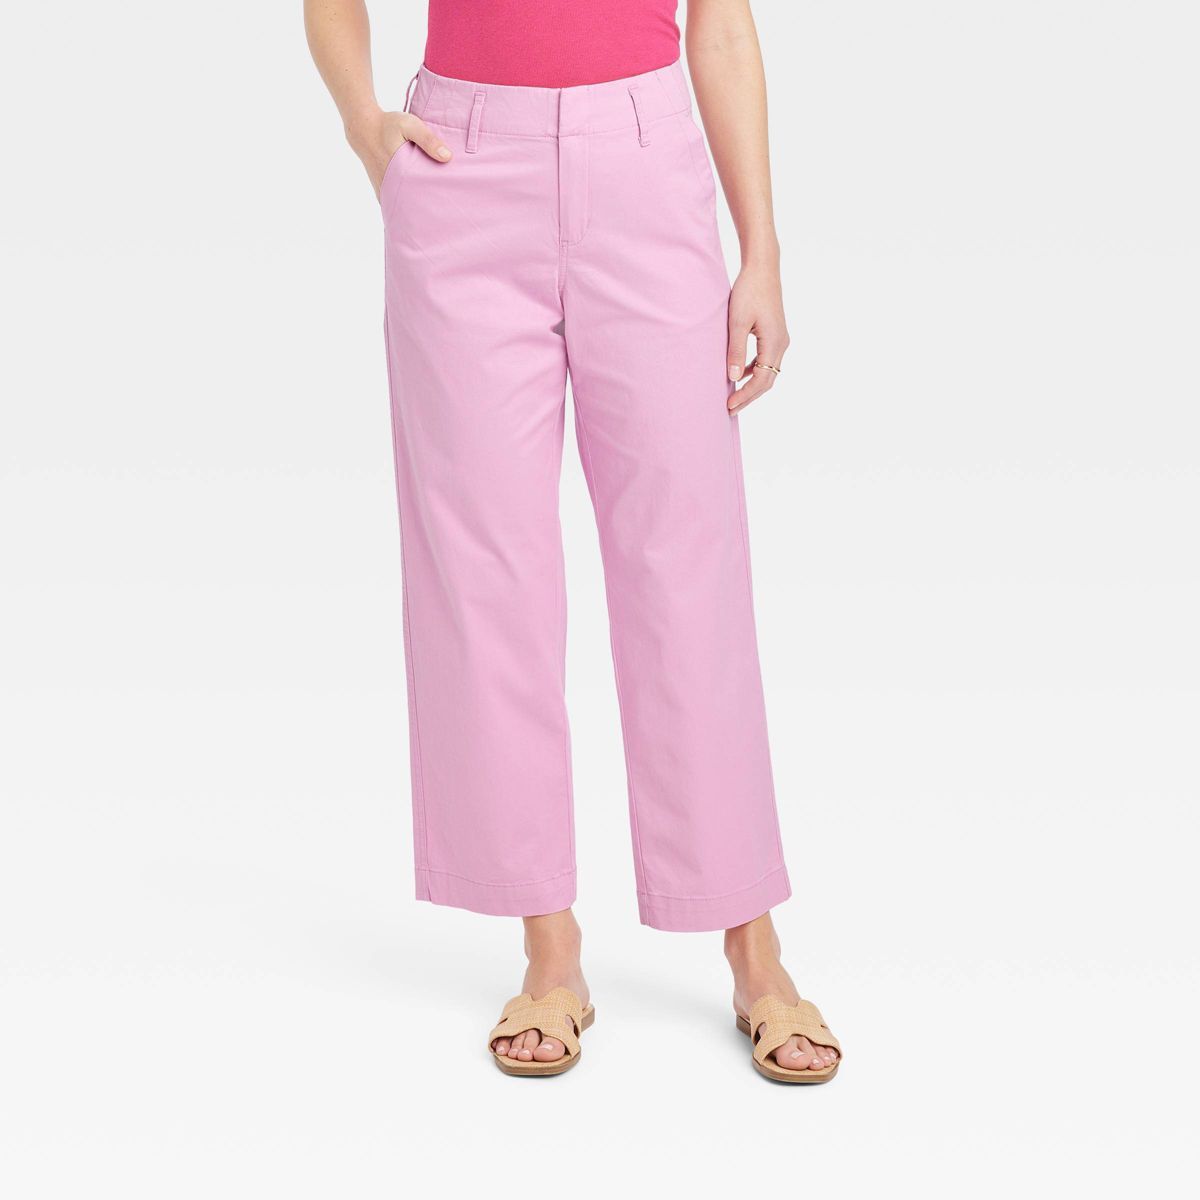 Women's High-Rise Straight Ankle Chino Pants - A New Day™ Light Pink 2 | Target